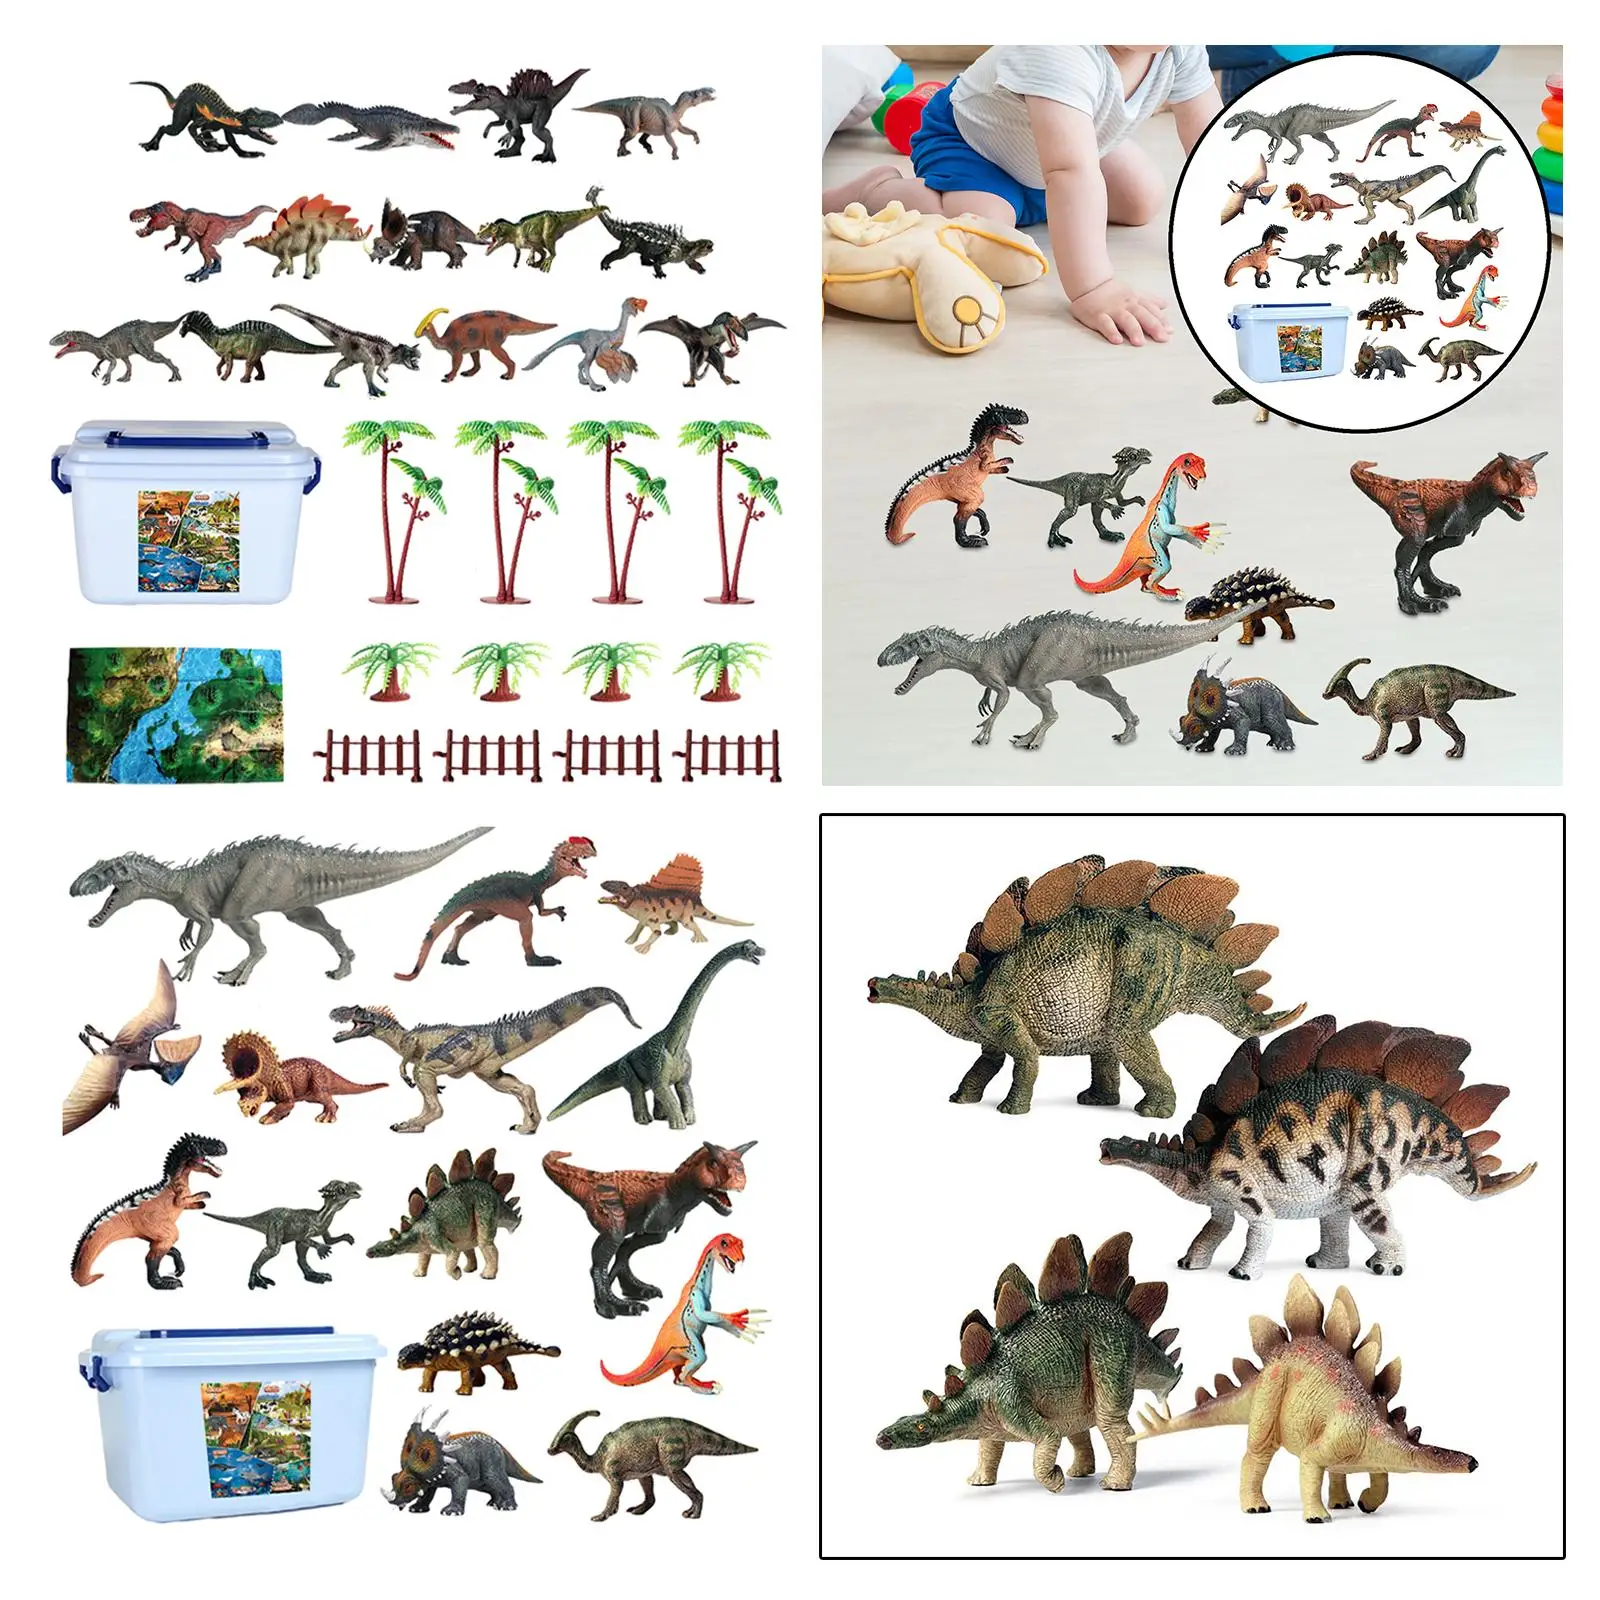 15 Pieces Dinosaur Toys Decoration for Birthday Party Favors Cake Topper